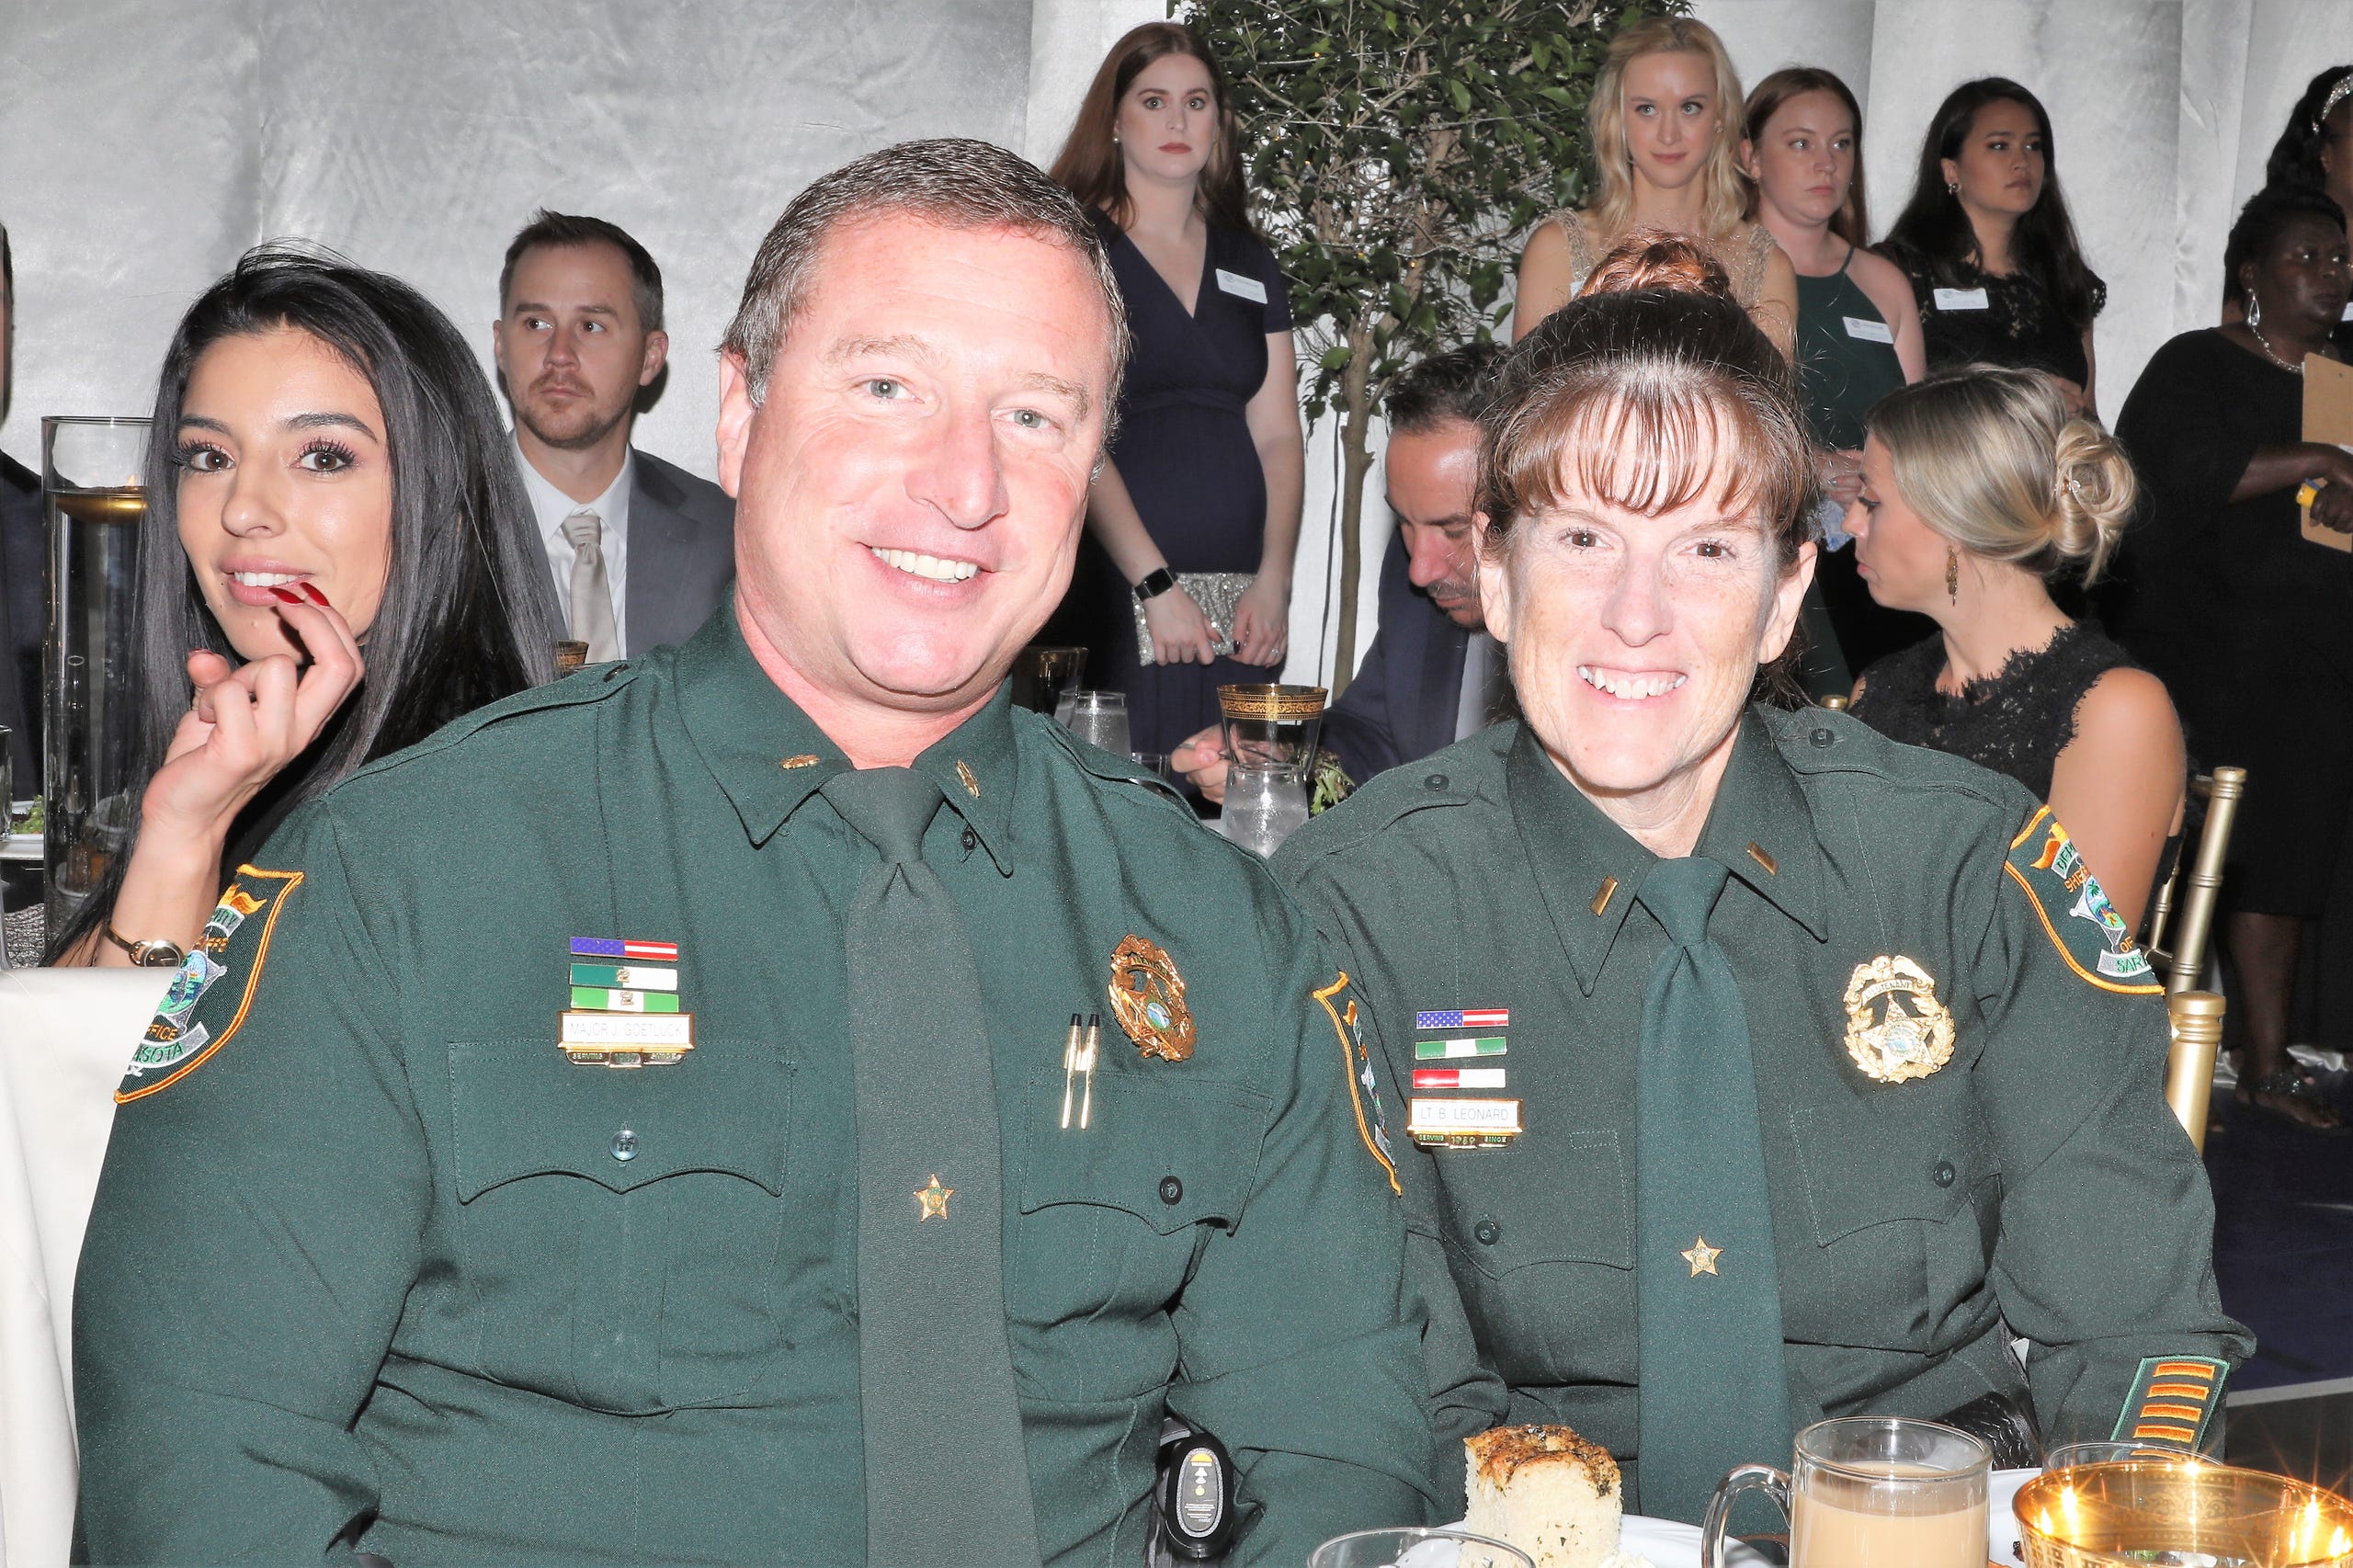 Sarasota County Sheriff's Office officers are in attendance tonight.  Boys & Girls Clubs of Sarasota and DeSoto Counties held their Champions for Children Gala on November 20, 2021. Over 400 people came out to celebrate longtime supporters and donors Steven and Marjolaine Townsend who also have a scholarship fund in their name that has benefitted thirty-two college students since its inception in 2018. JANET COMBS/HERALD-TRIBUNE